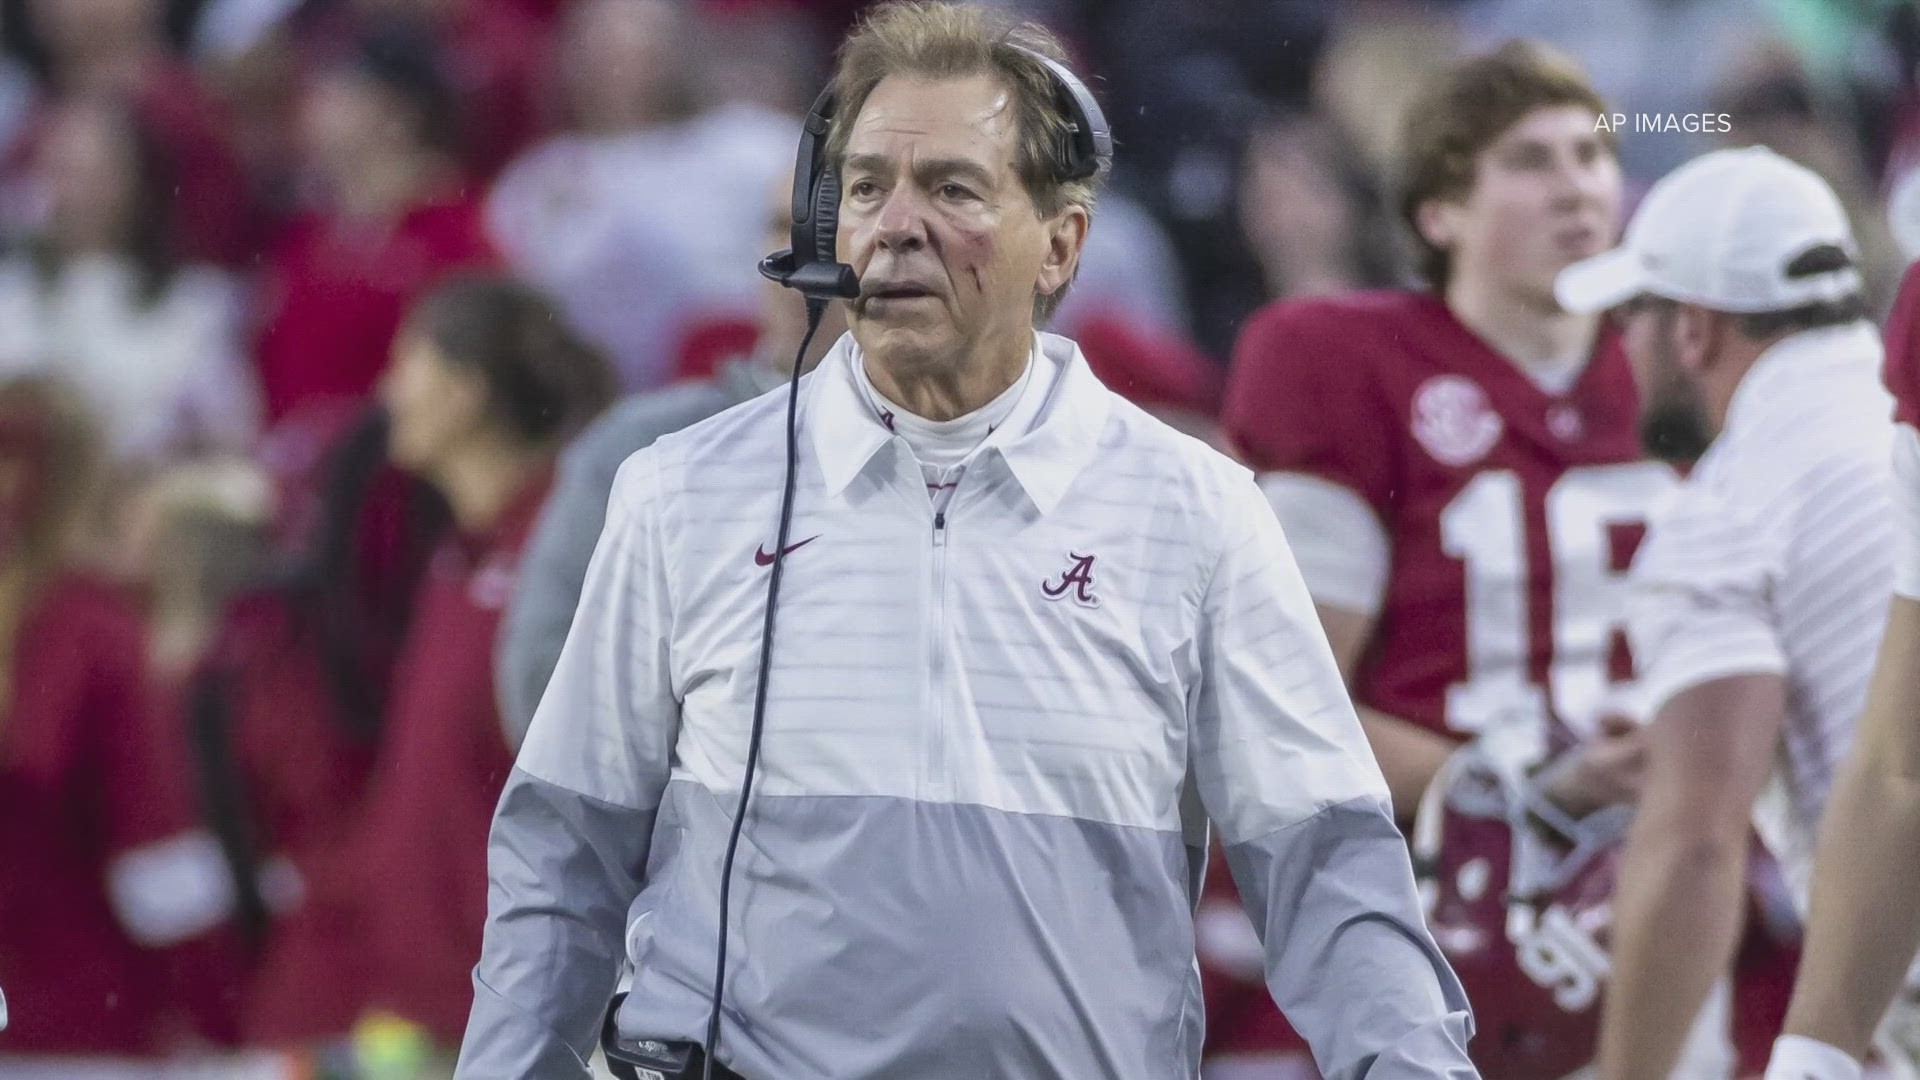 Saban has coached Alabama to six national titles in his 17 seasons there.